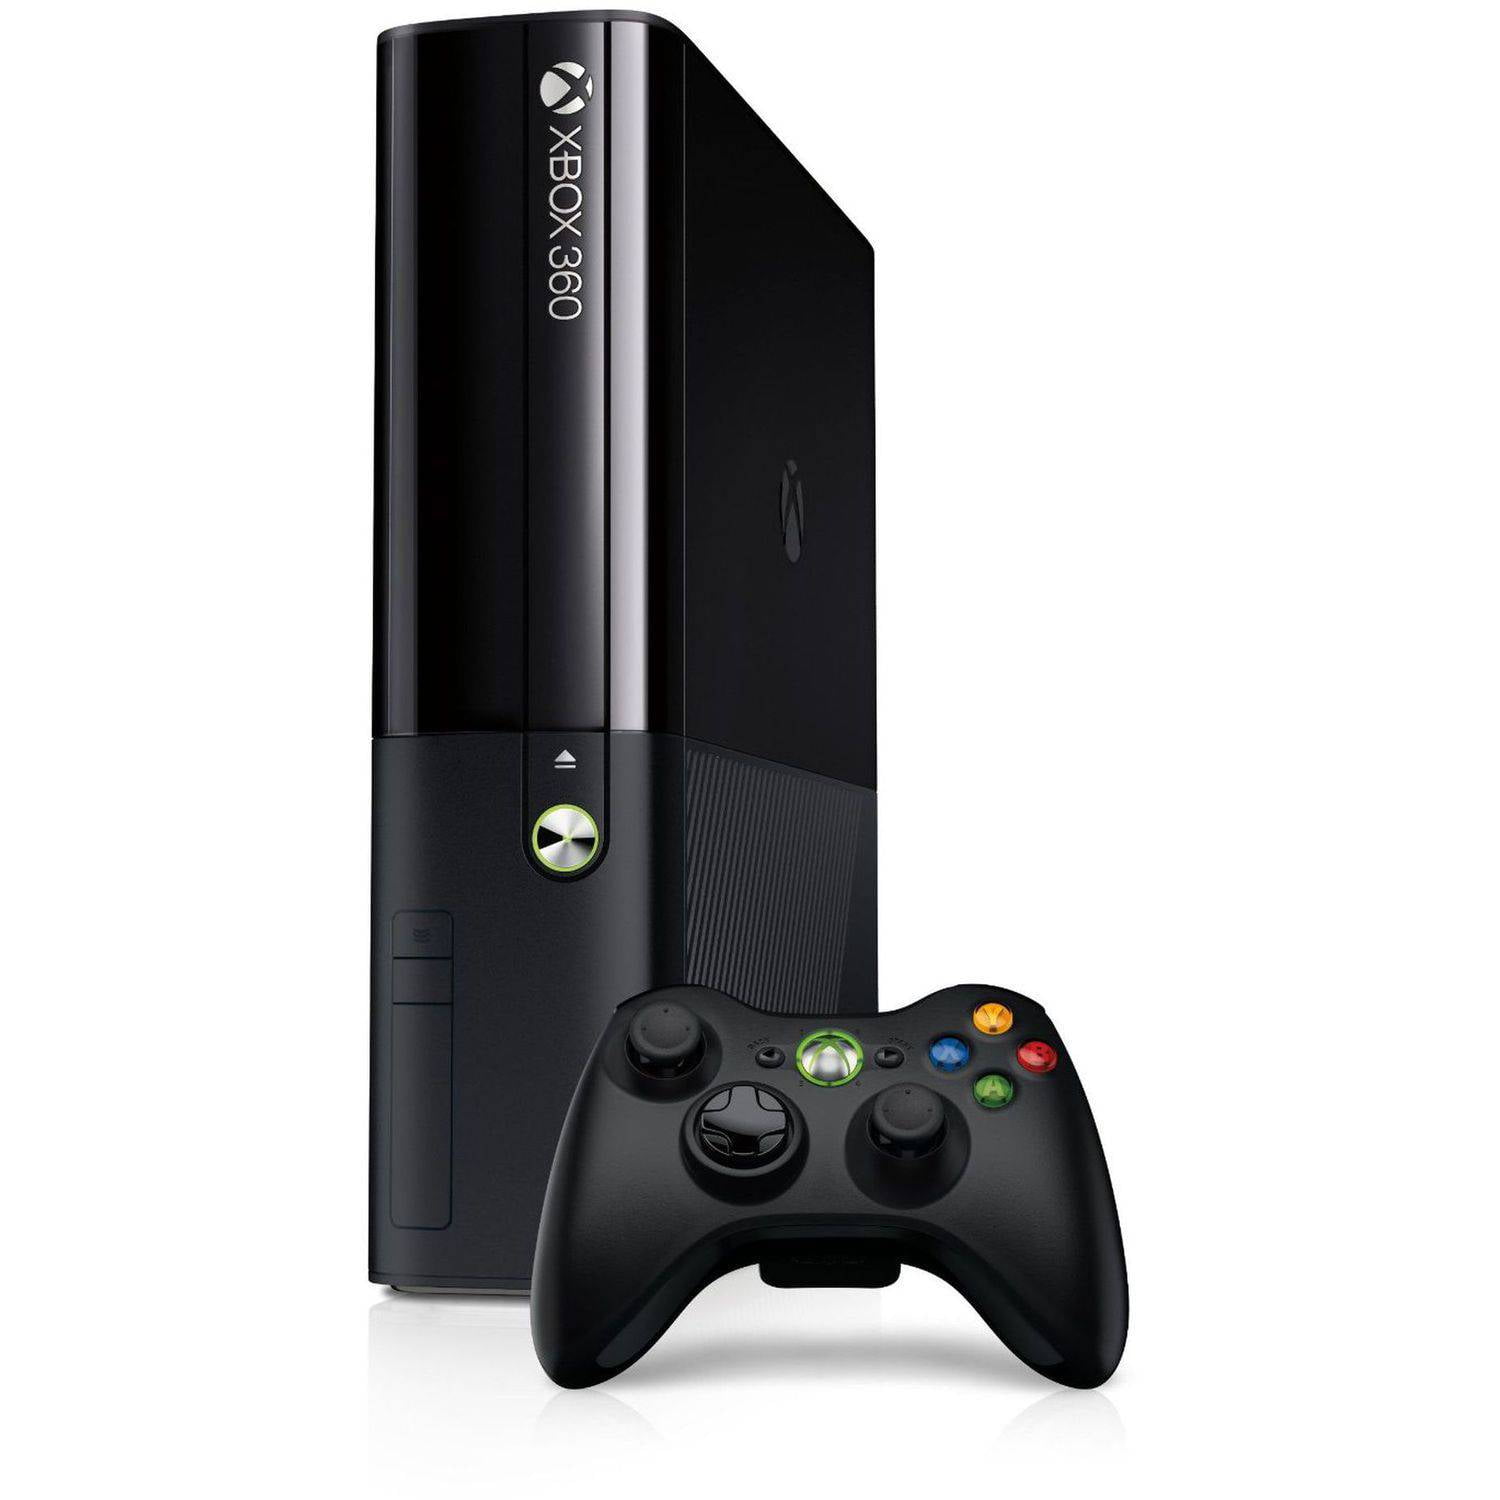 Xbox 360s are about to be the must-have console this holiday